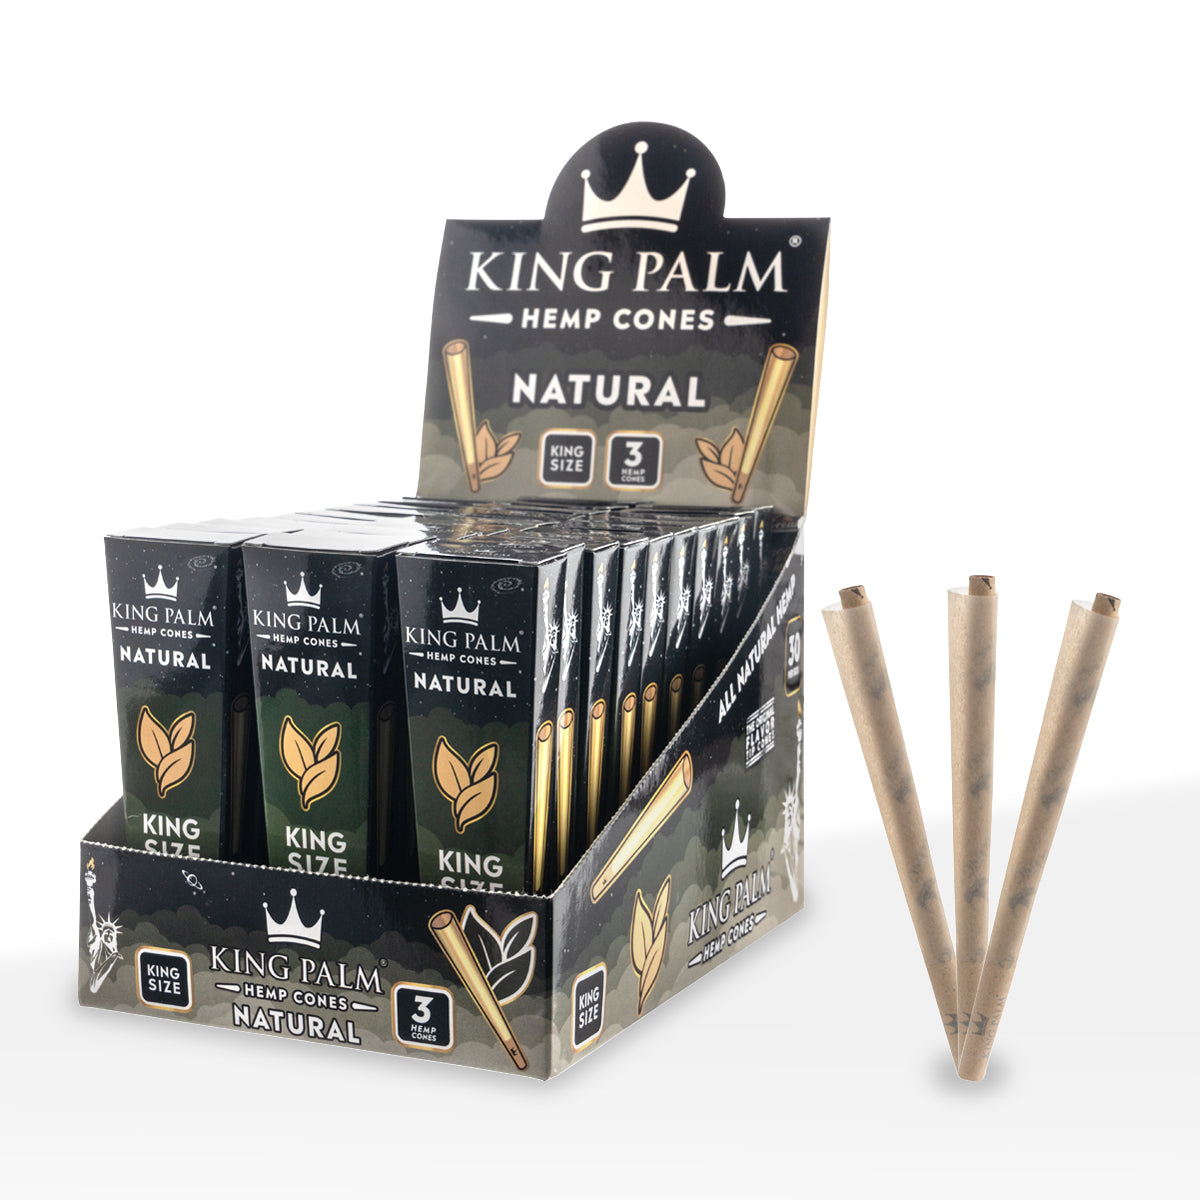 King Palm™ | Hemp Cones King Size | 3 Pack - 30 Count - Various Flavors  Biohazard Inc Natural  